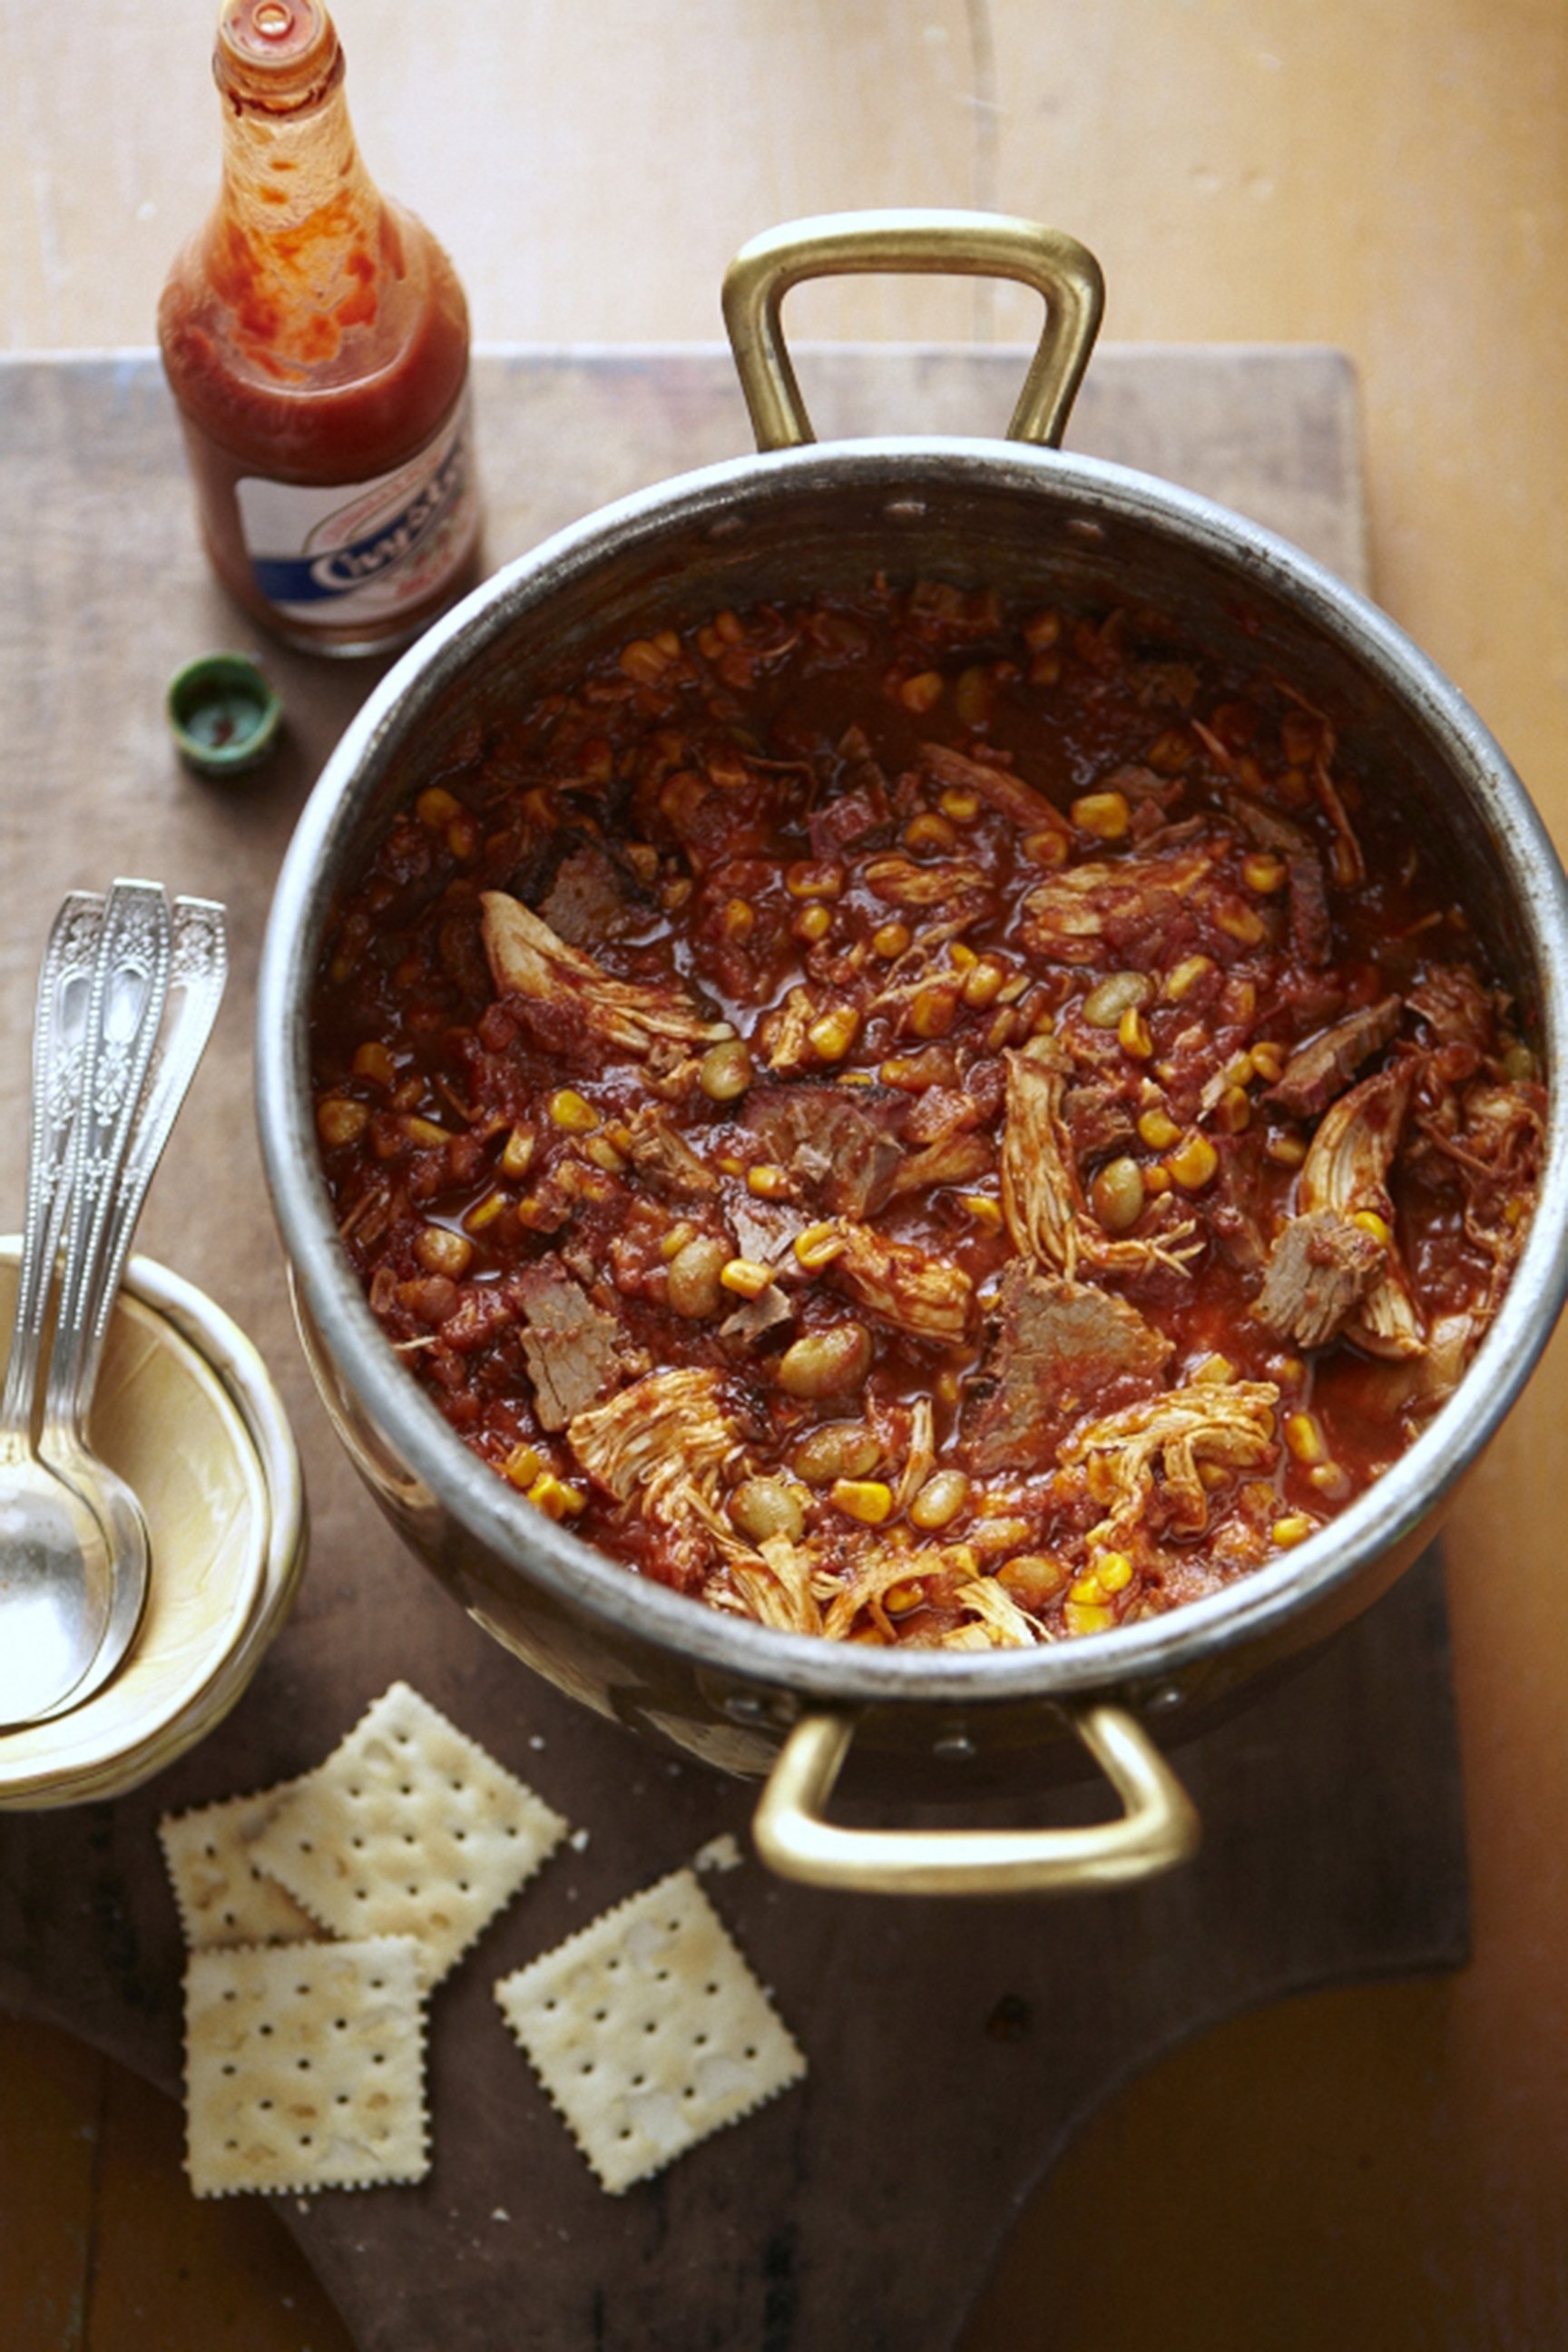 PHOTO: Georgia: Brunswick Stew
1,864% more popular than in other states